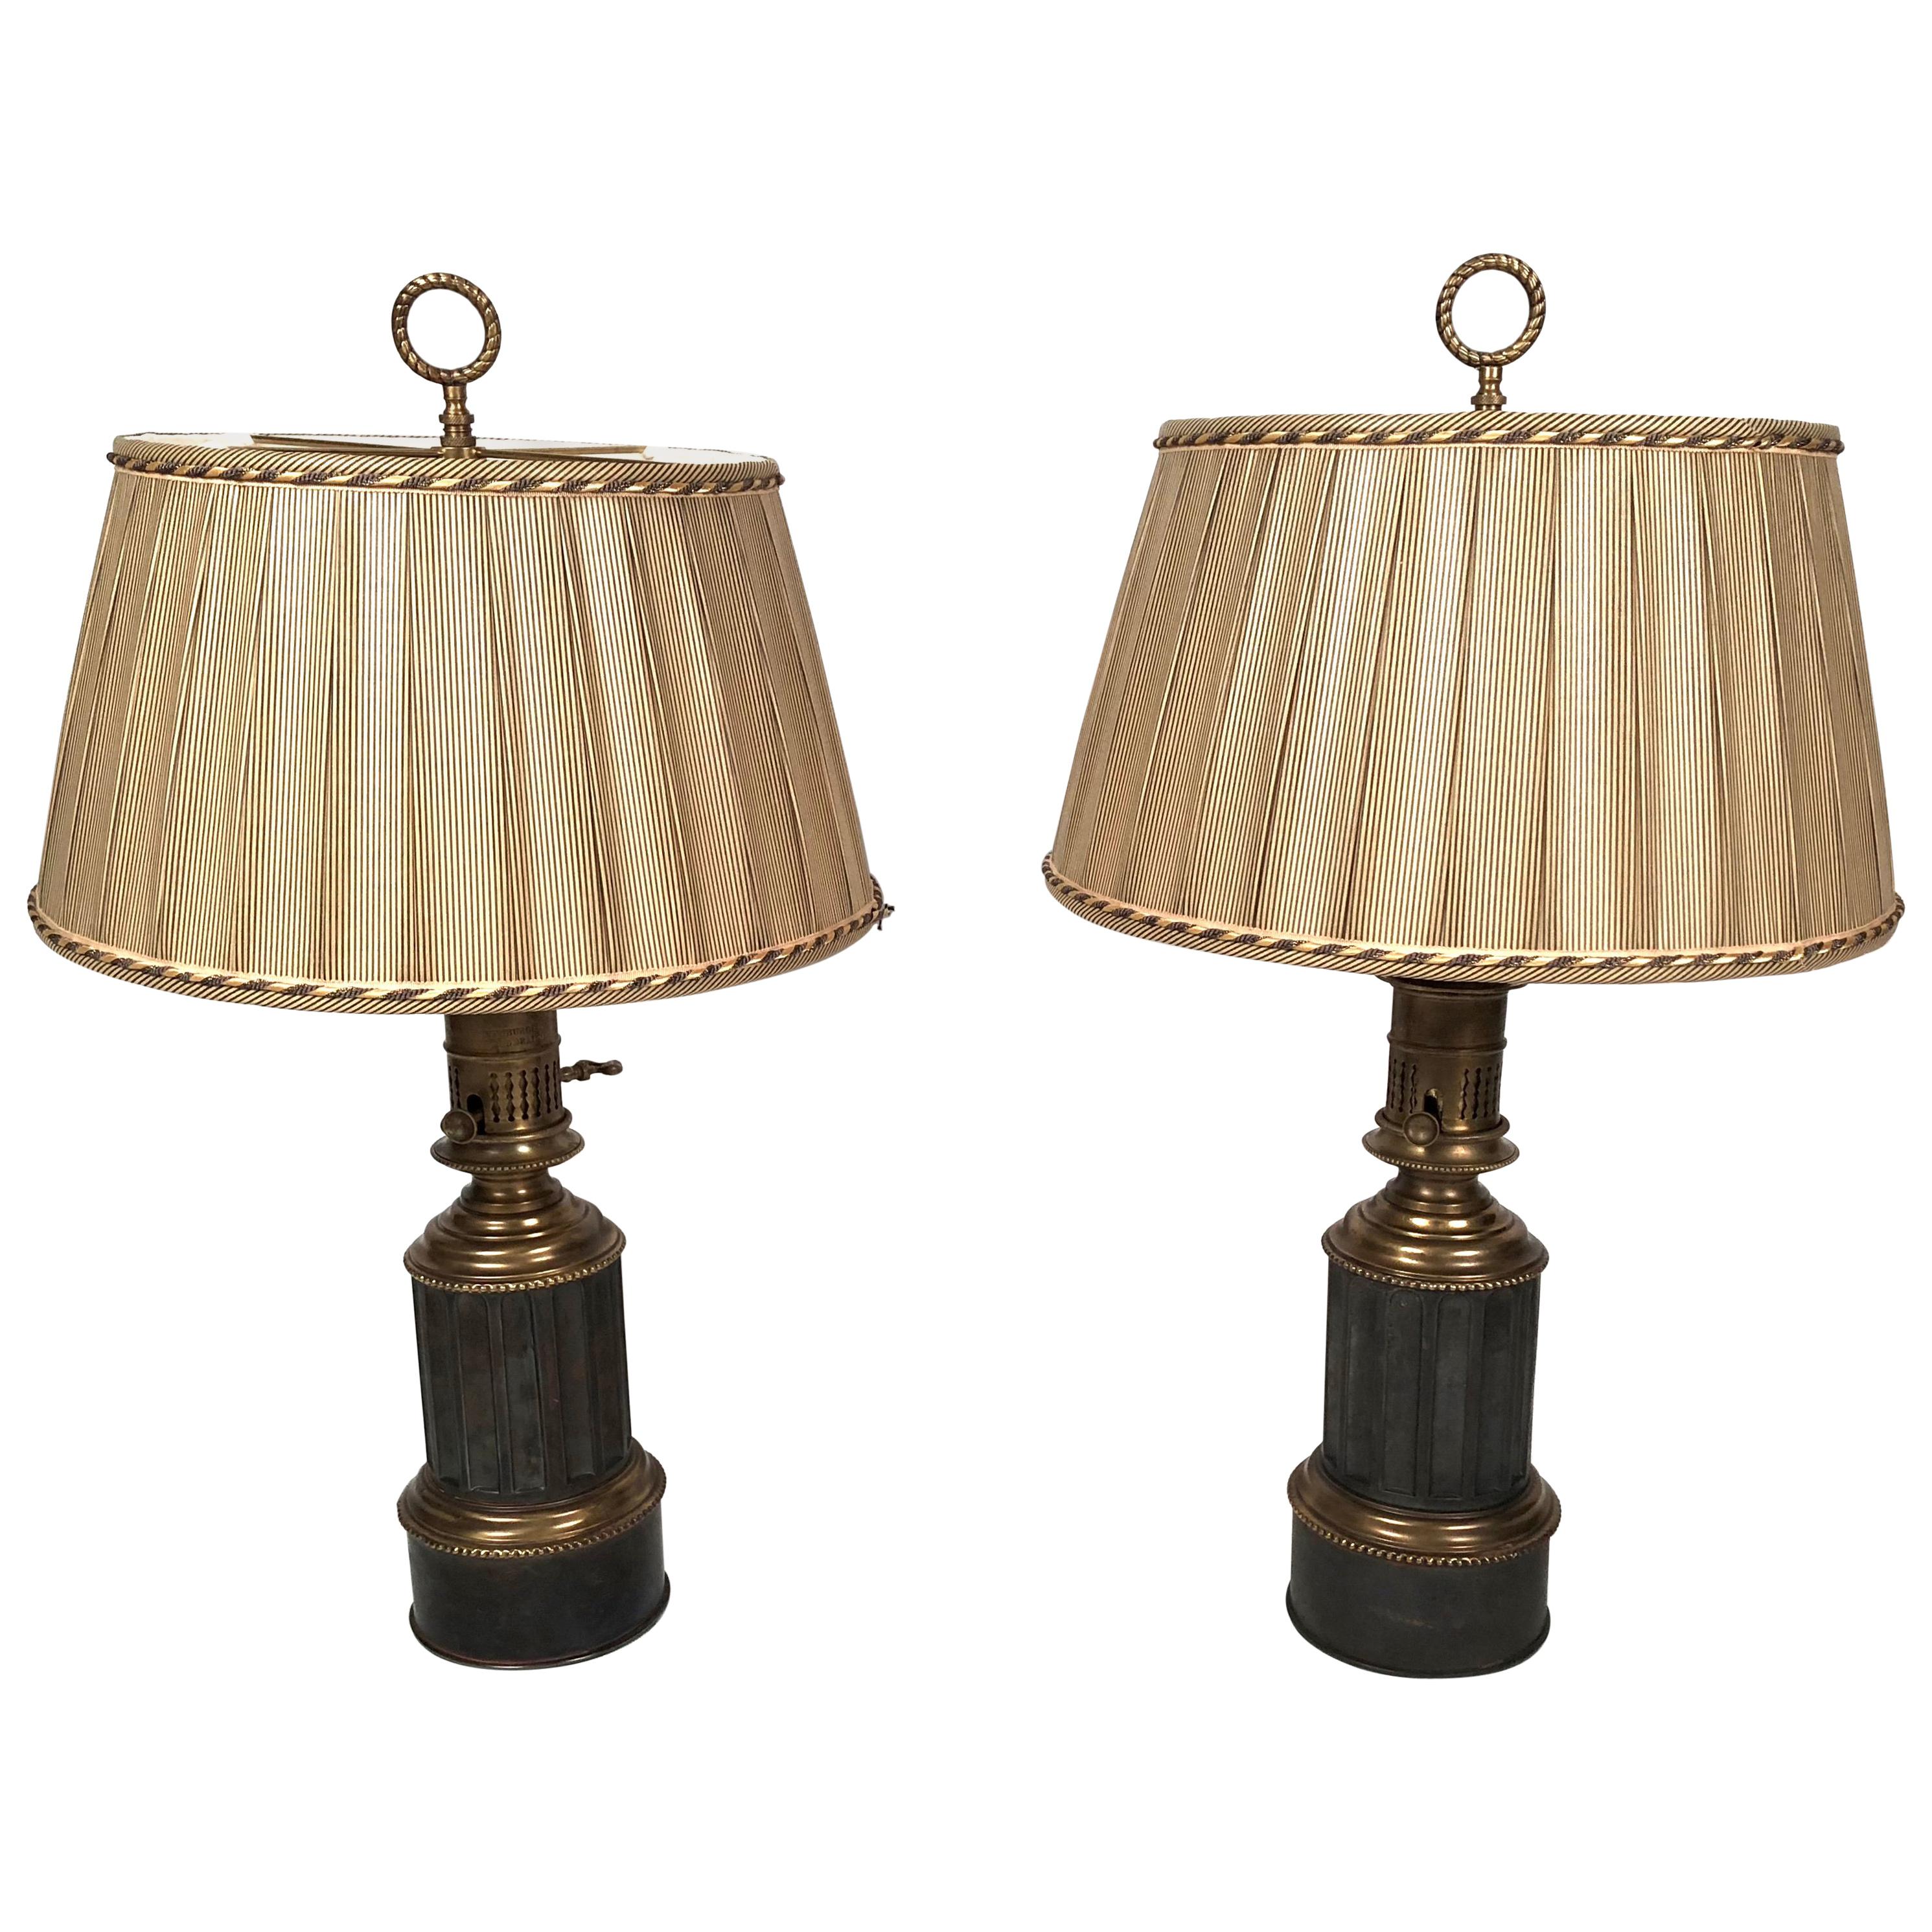 Pair of French Neoclassical Brass and Steel Lamps by Neuberger, Paris